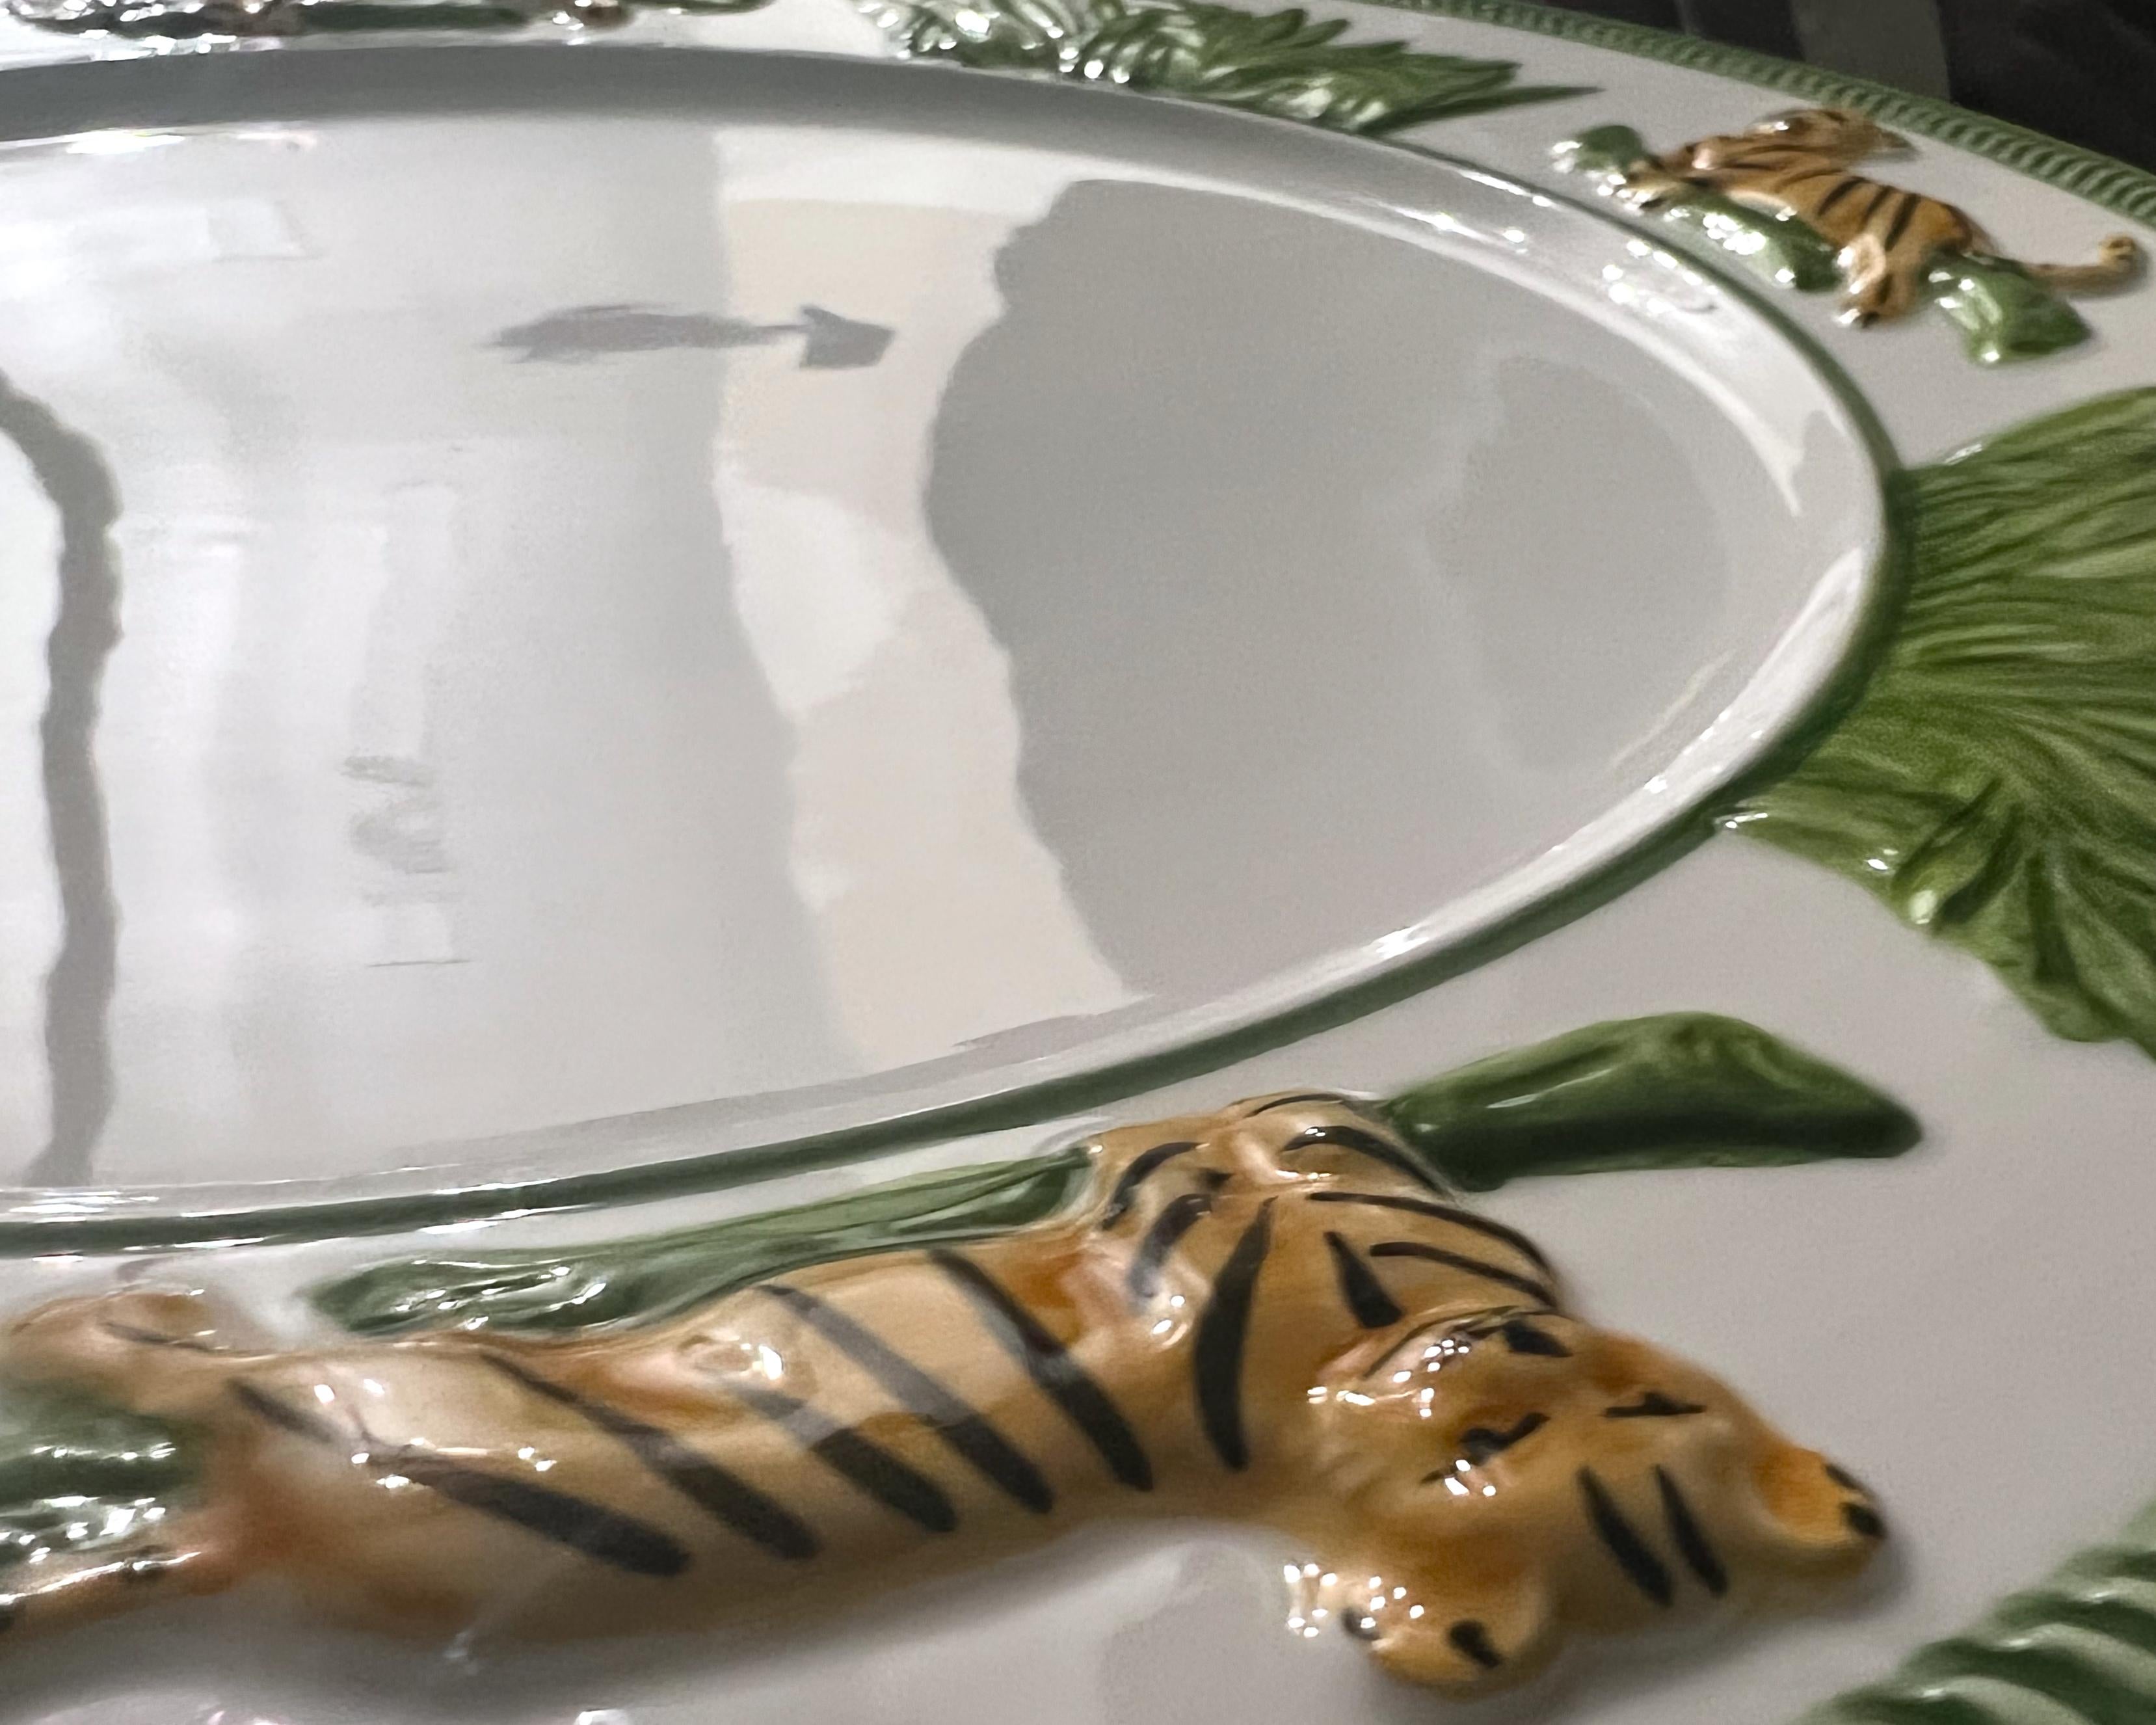 Les Ottomans Le Tigres White Ceramic Plates, Pair, Hand-Painted, Tigers, Italy 4